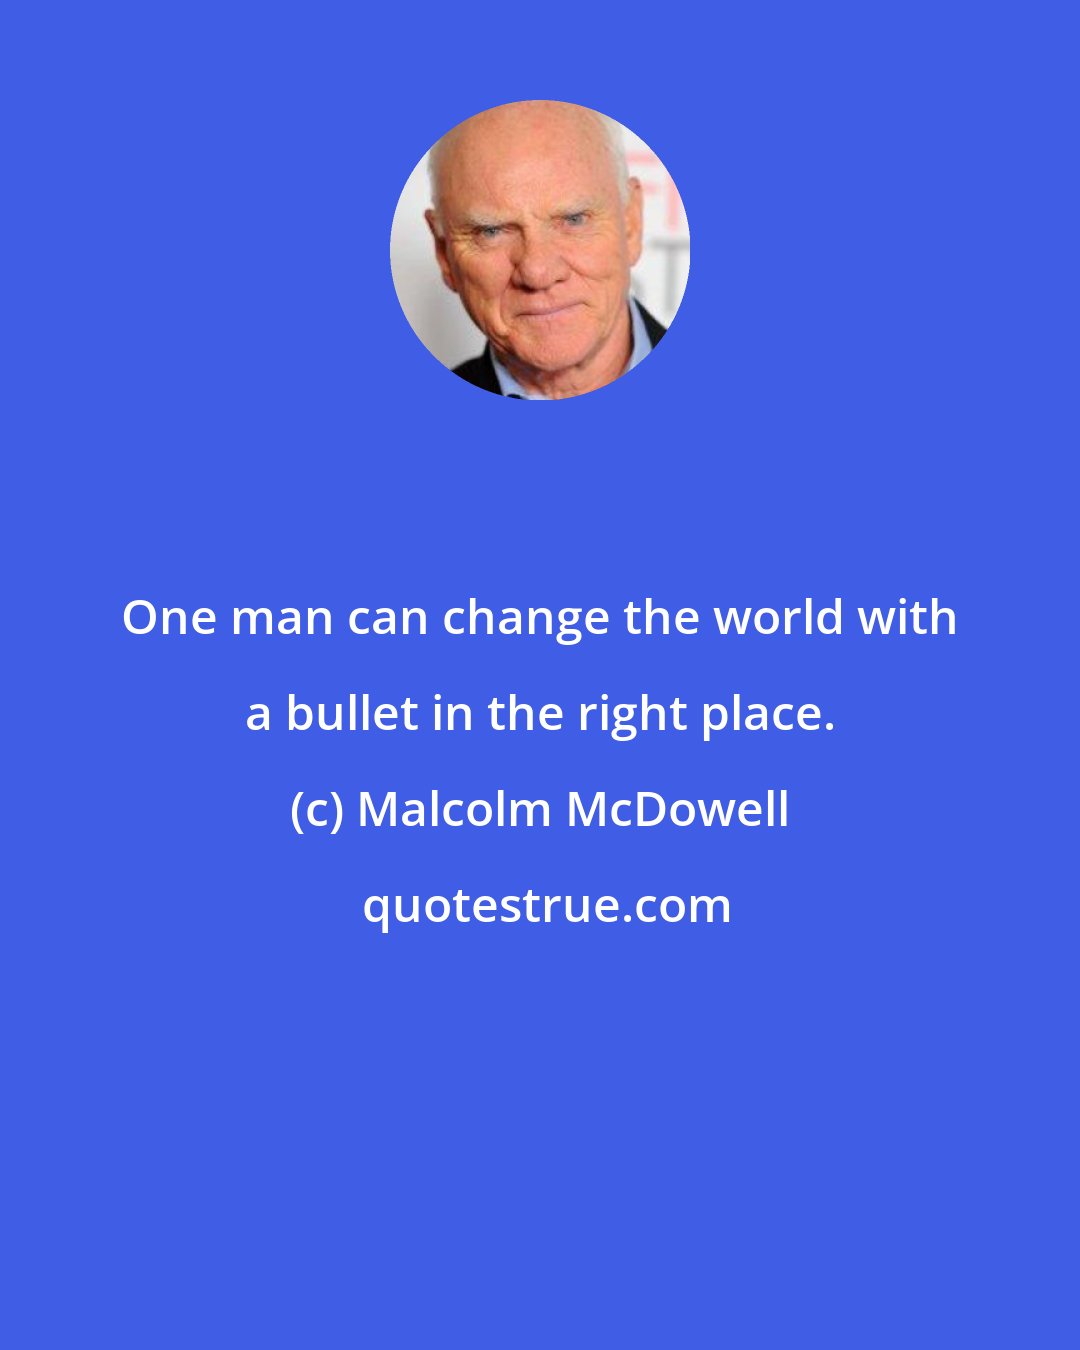 Malcolm McDowell: One man can change the world with a bullet in the right place.